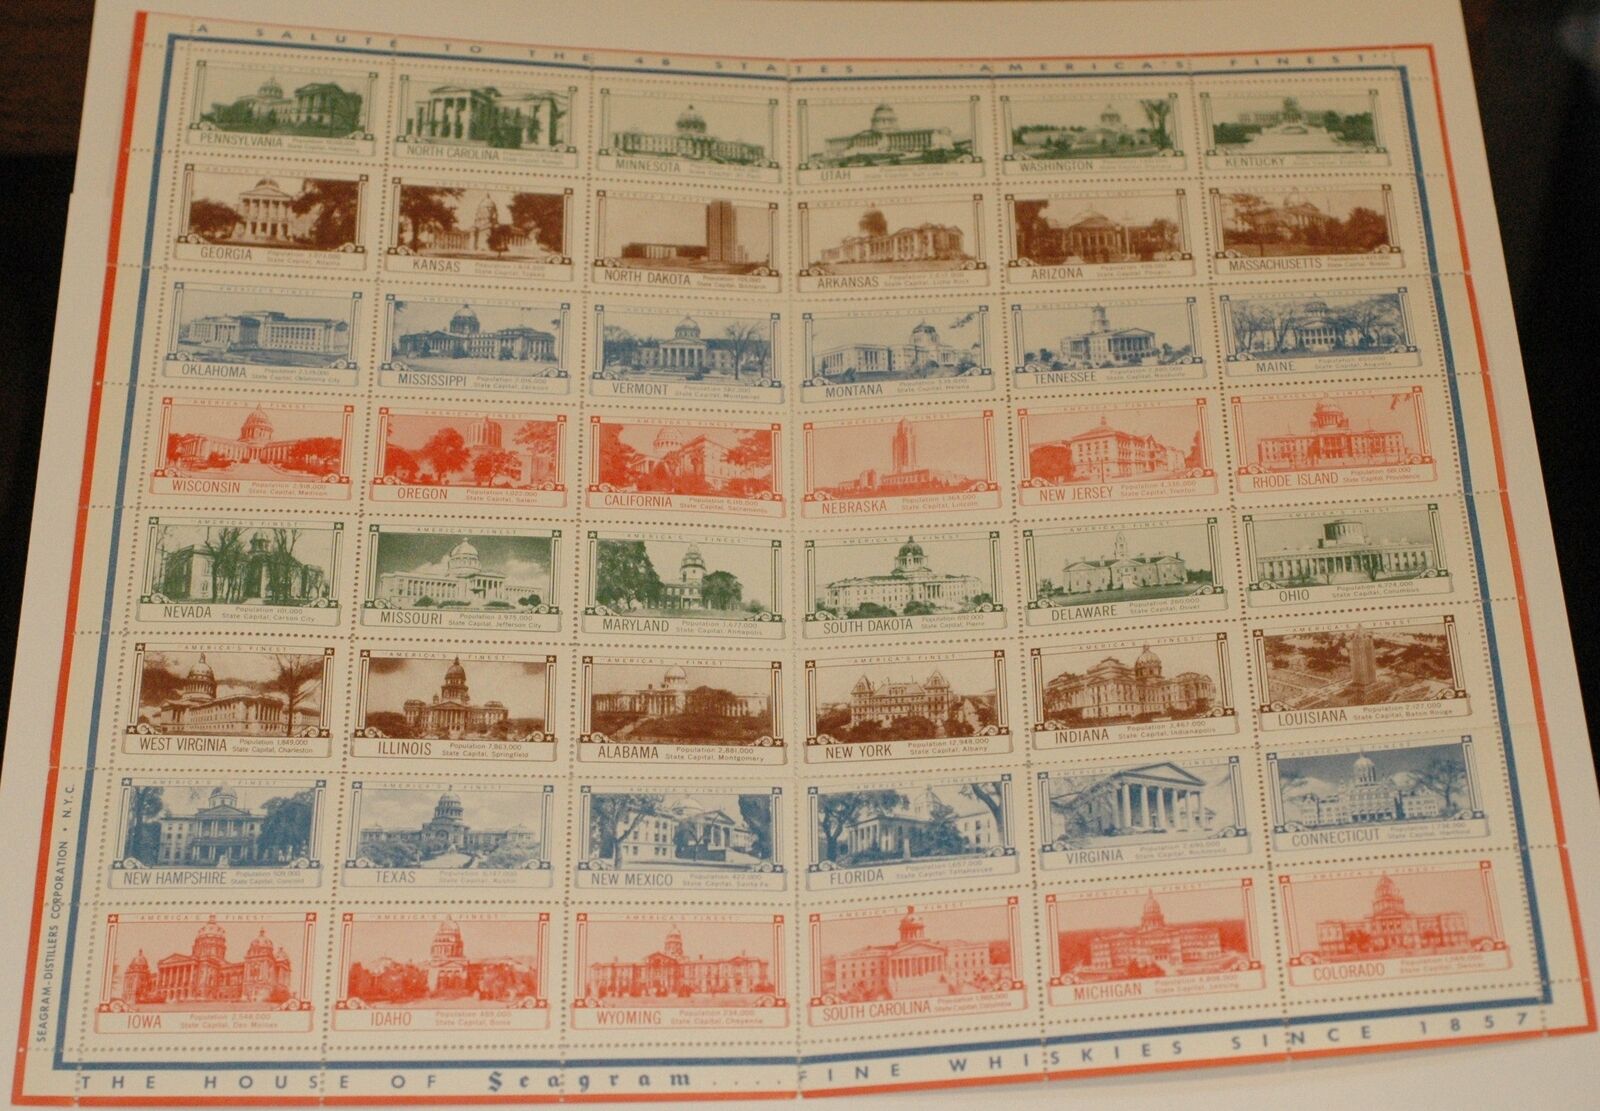 House of Seagram Salute to the 48 states Cinderella poster stamp sheet